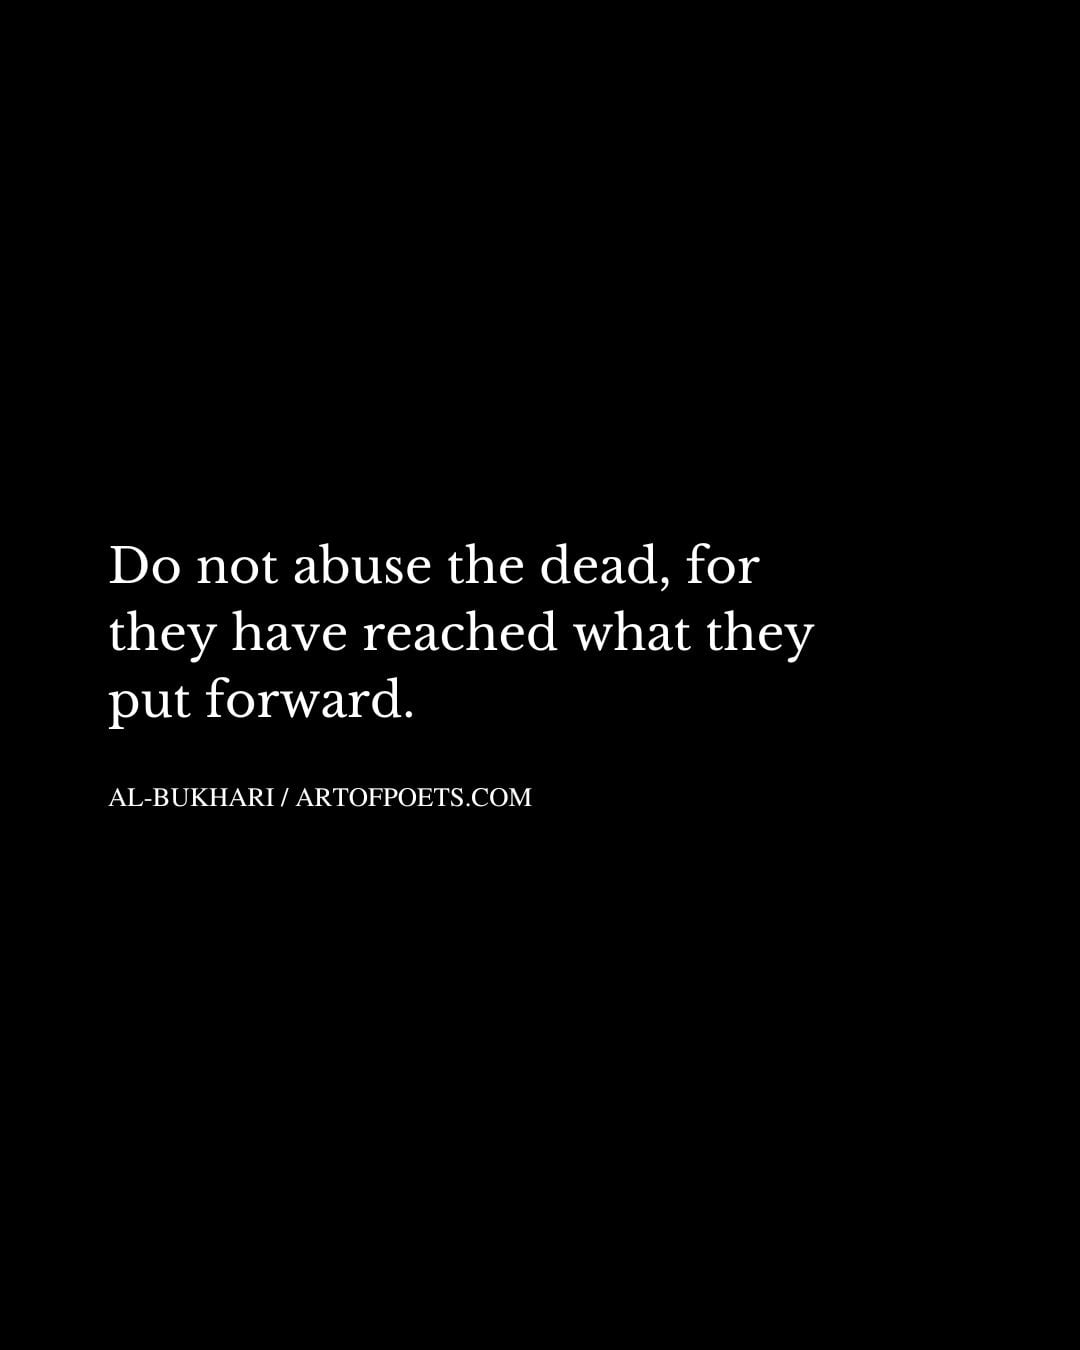 Do not abuse the dead for they have reached what they put forward